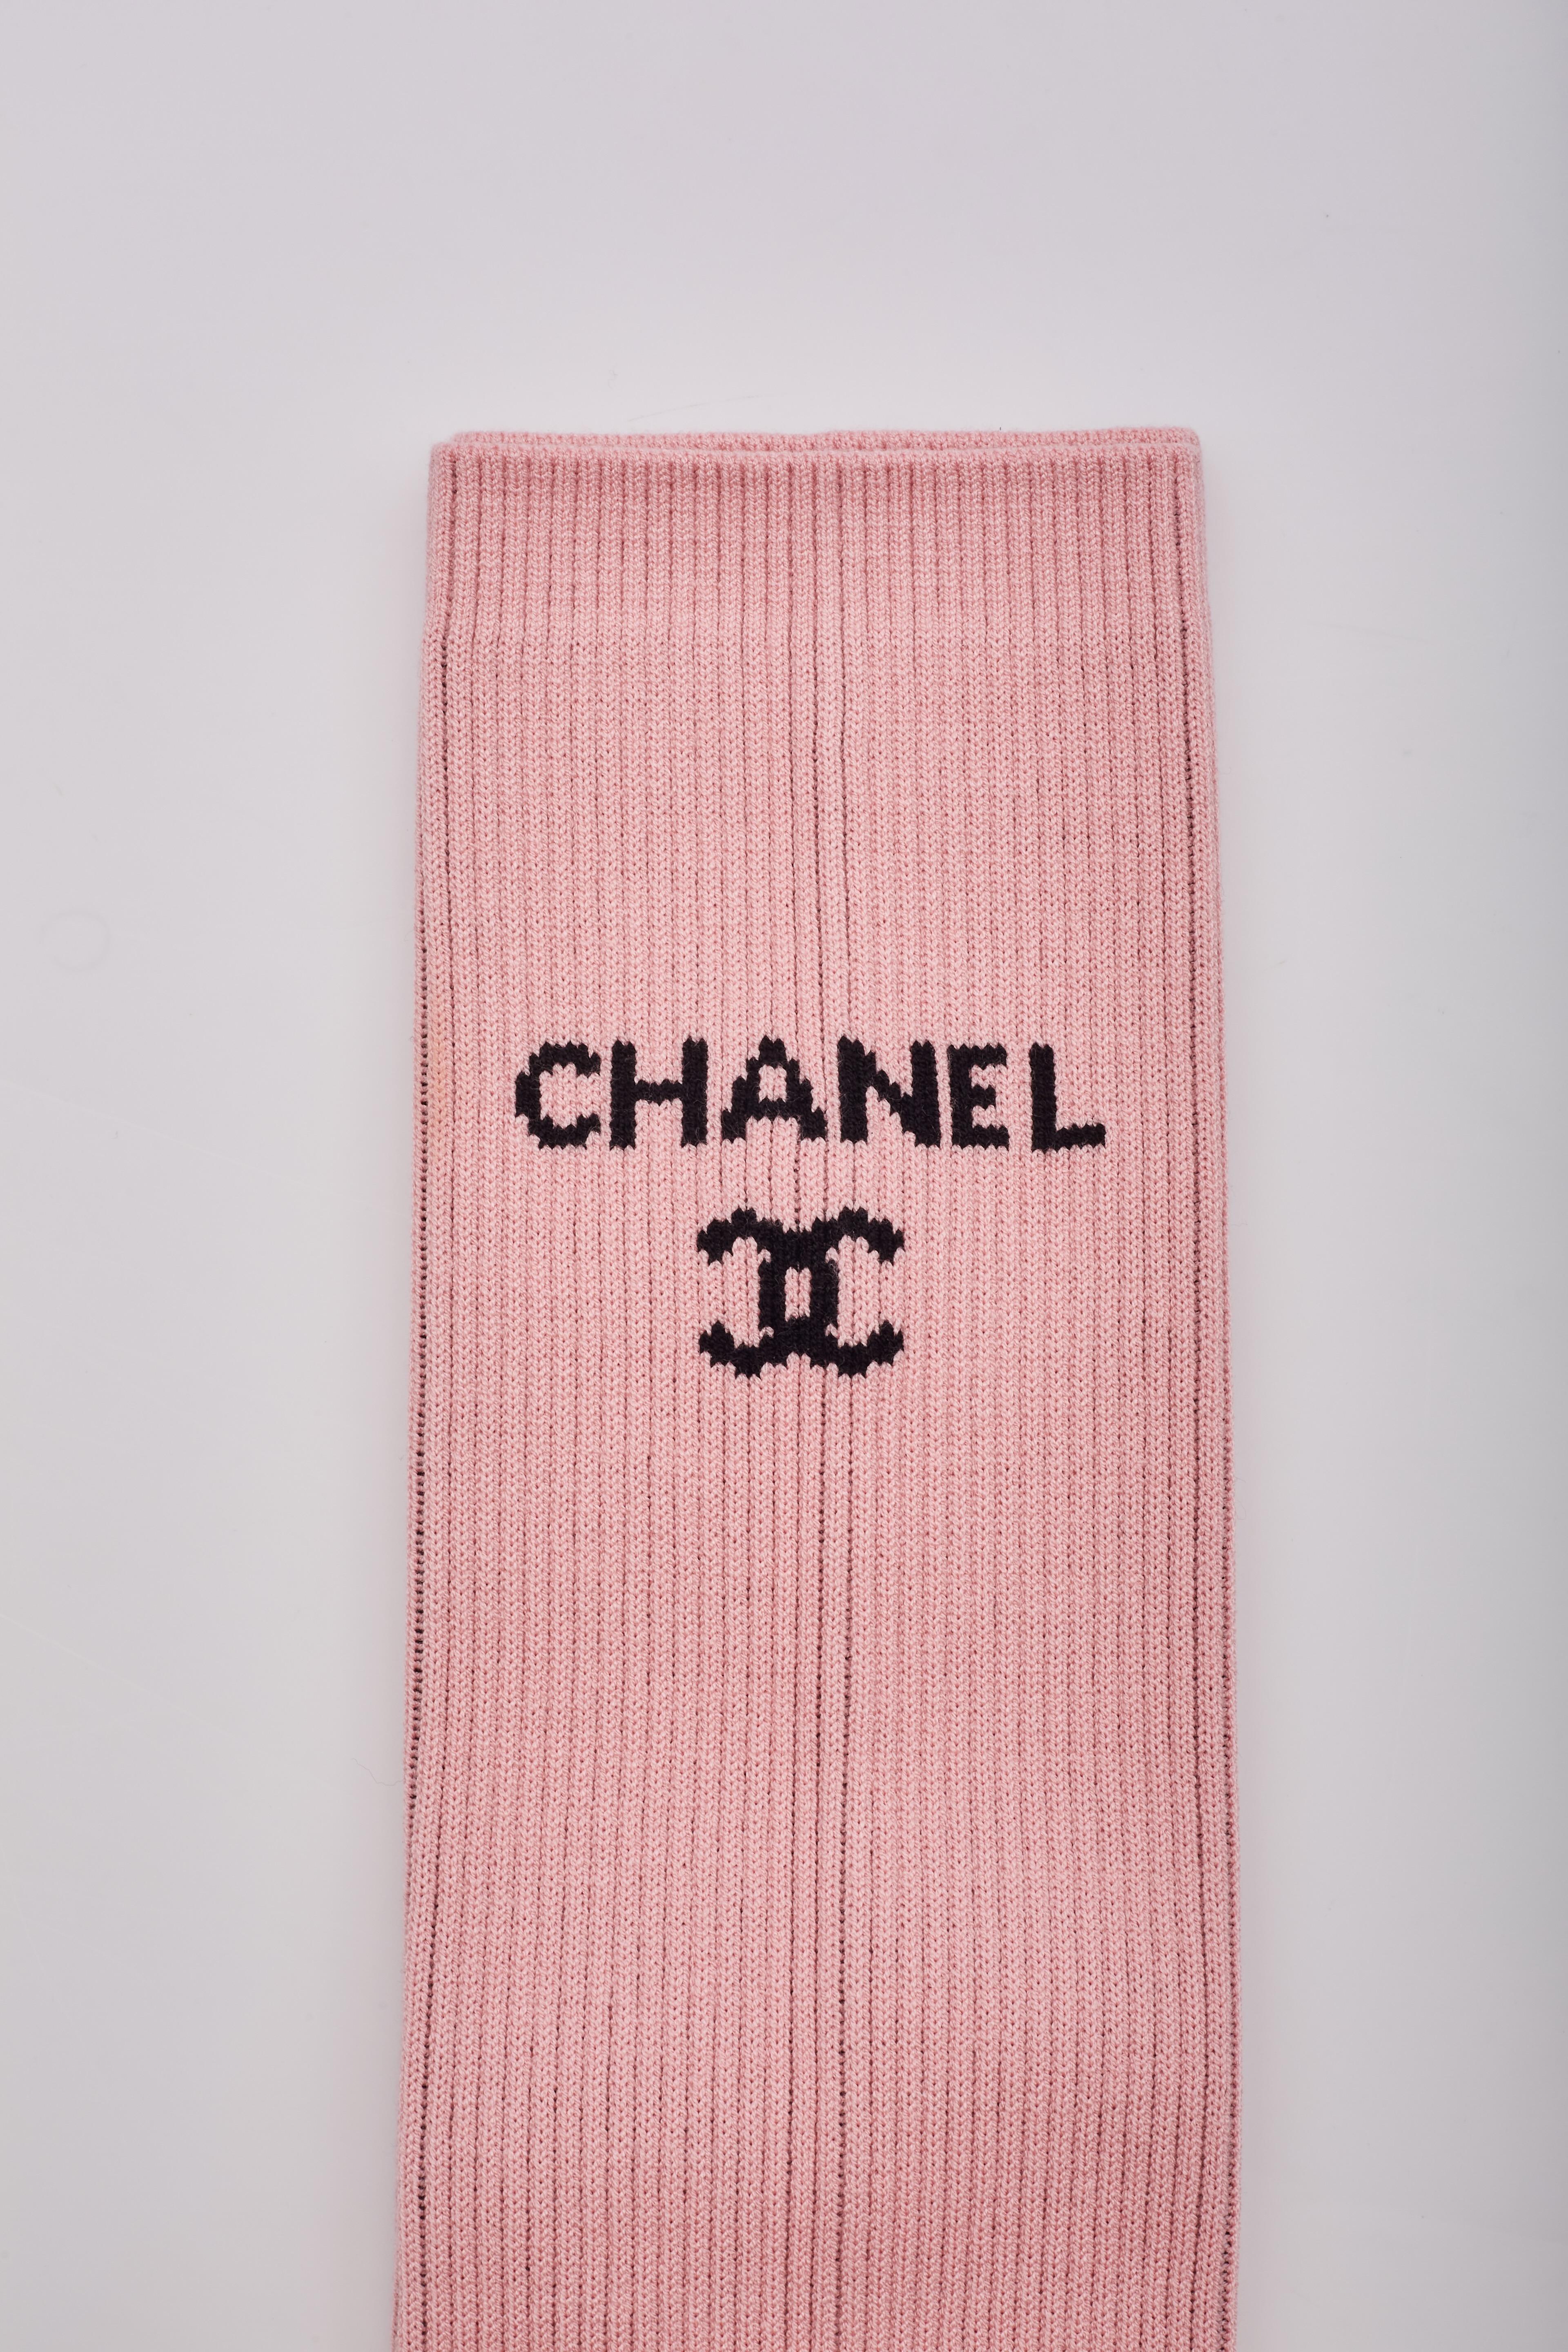 Chanel Logo Pink Knit Leg Warmers Gaiters For Sale 1